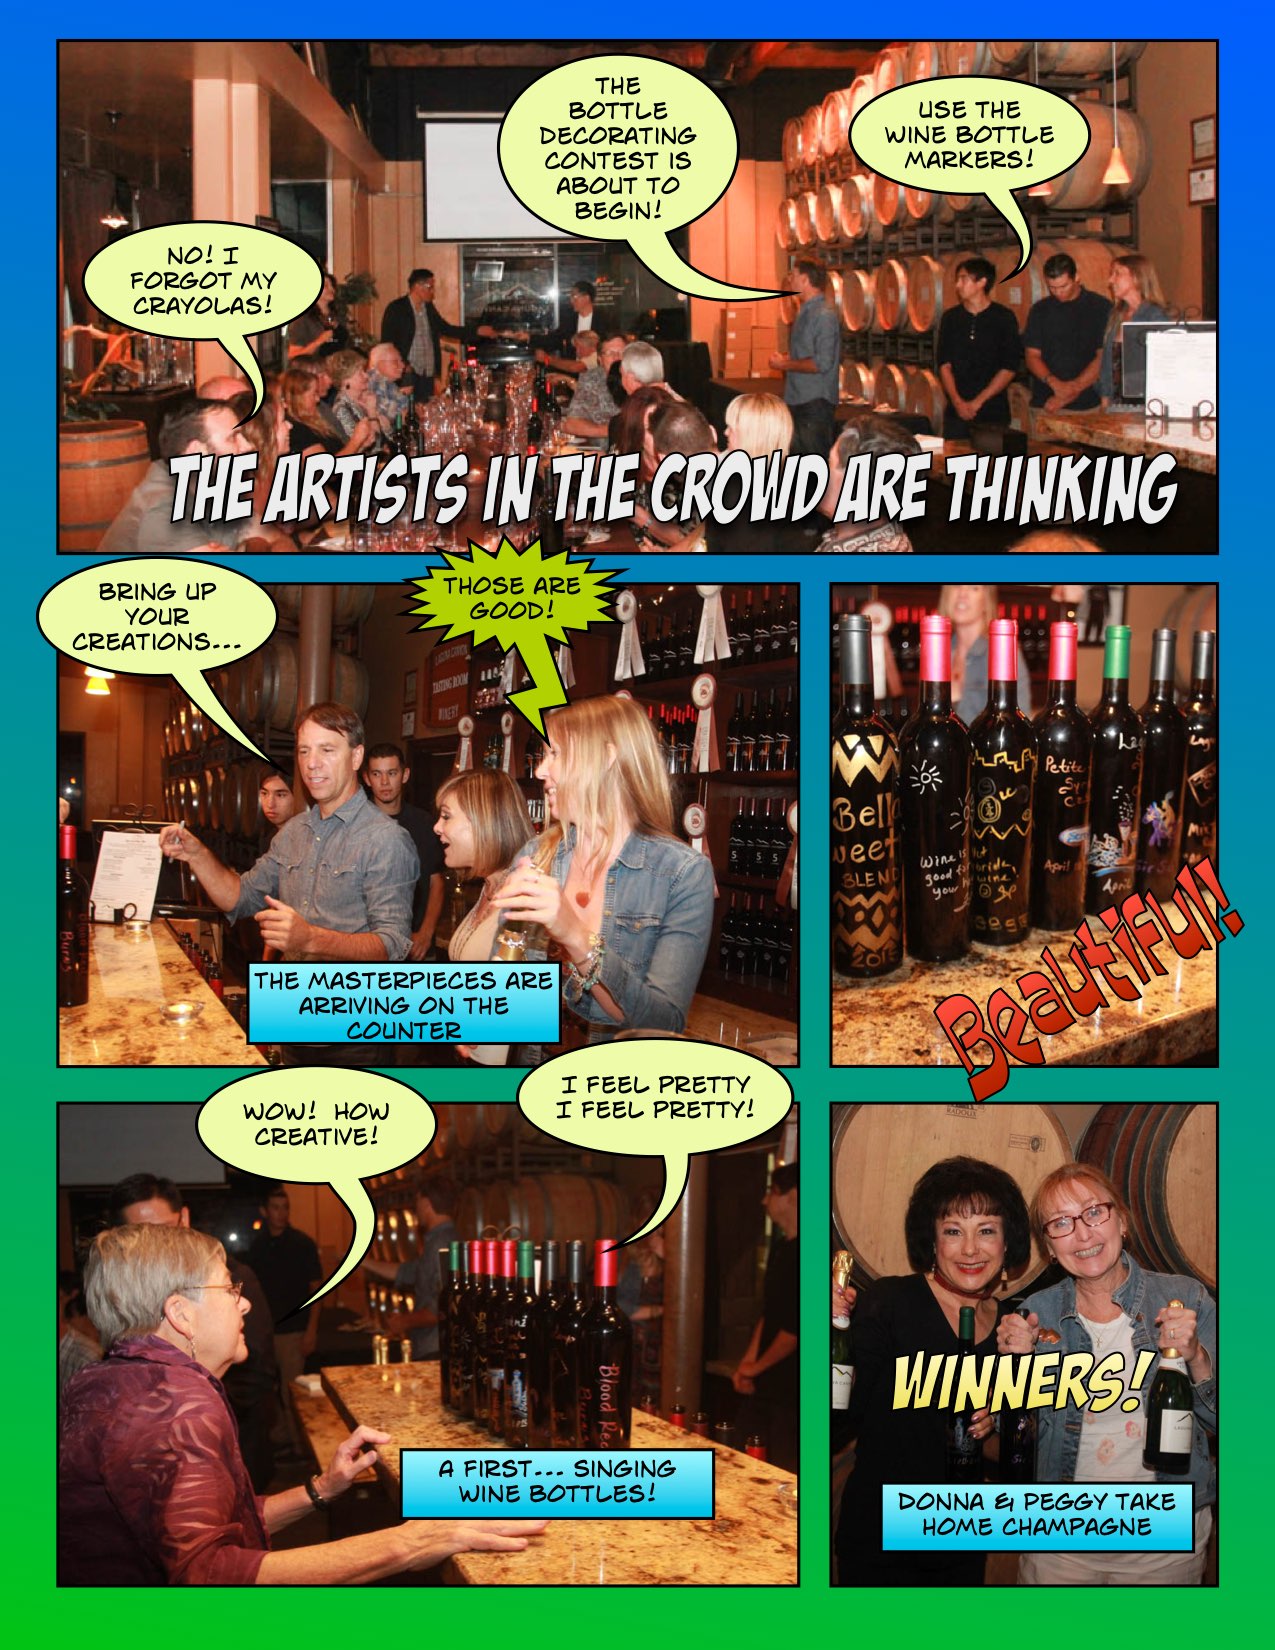 A comical view of the April 2015 Blending Party